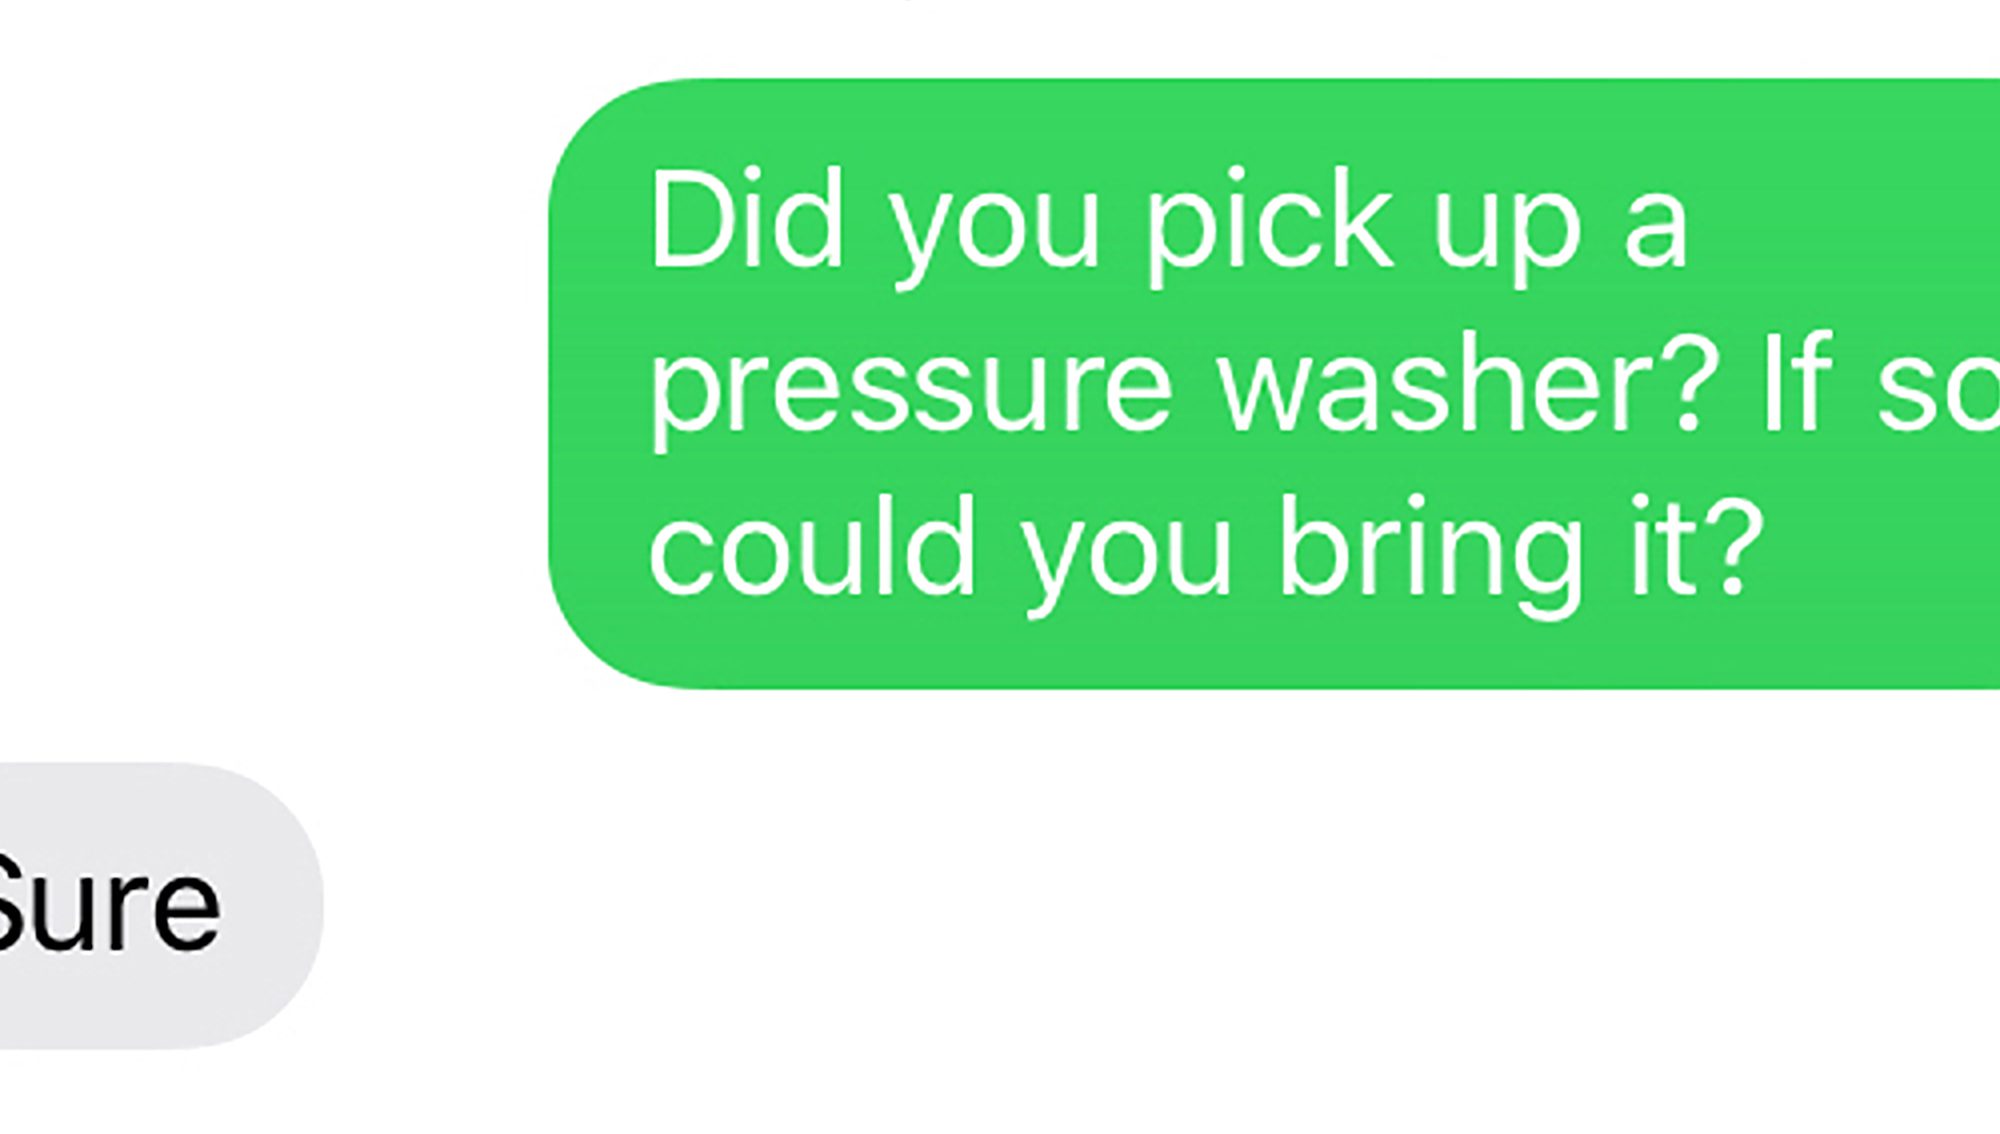 Text message that uses the word sure